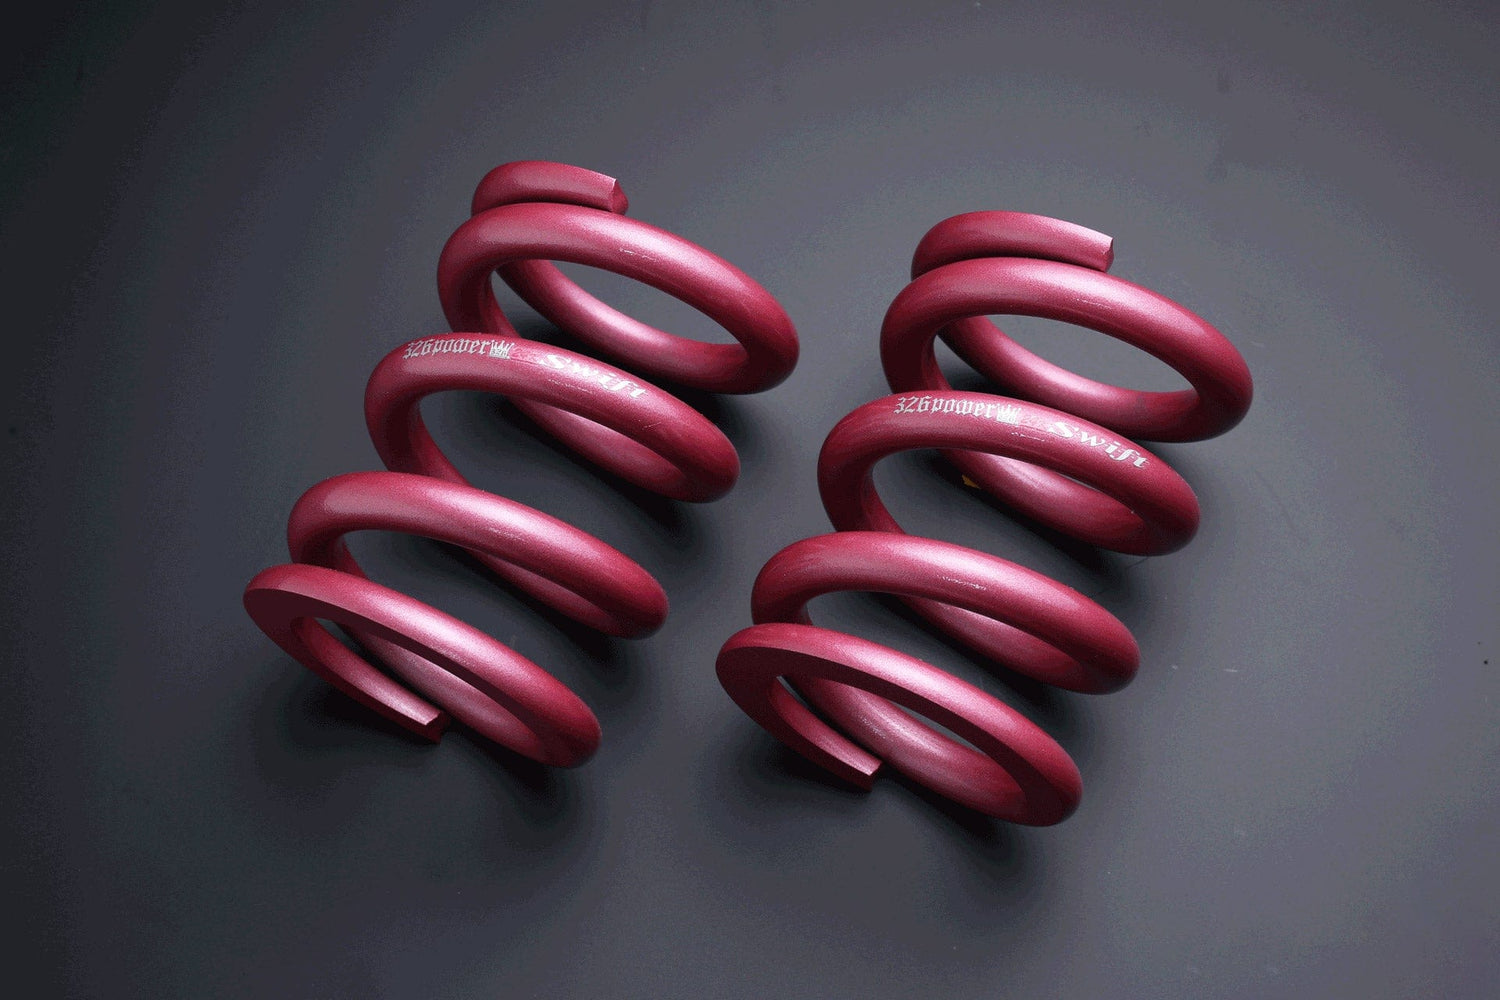 326POWER Mazibane Coilover Springs - ID63 H140